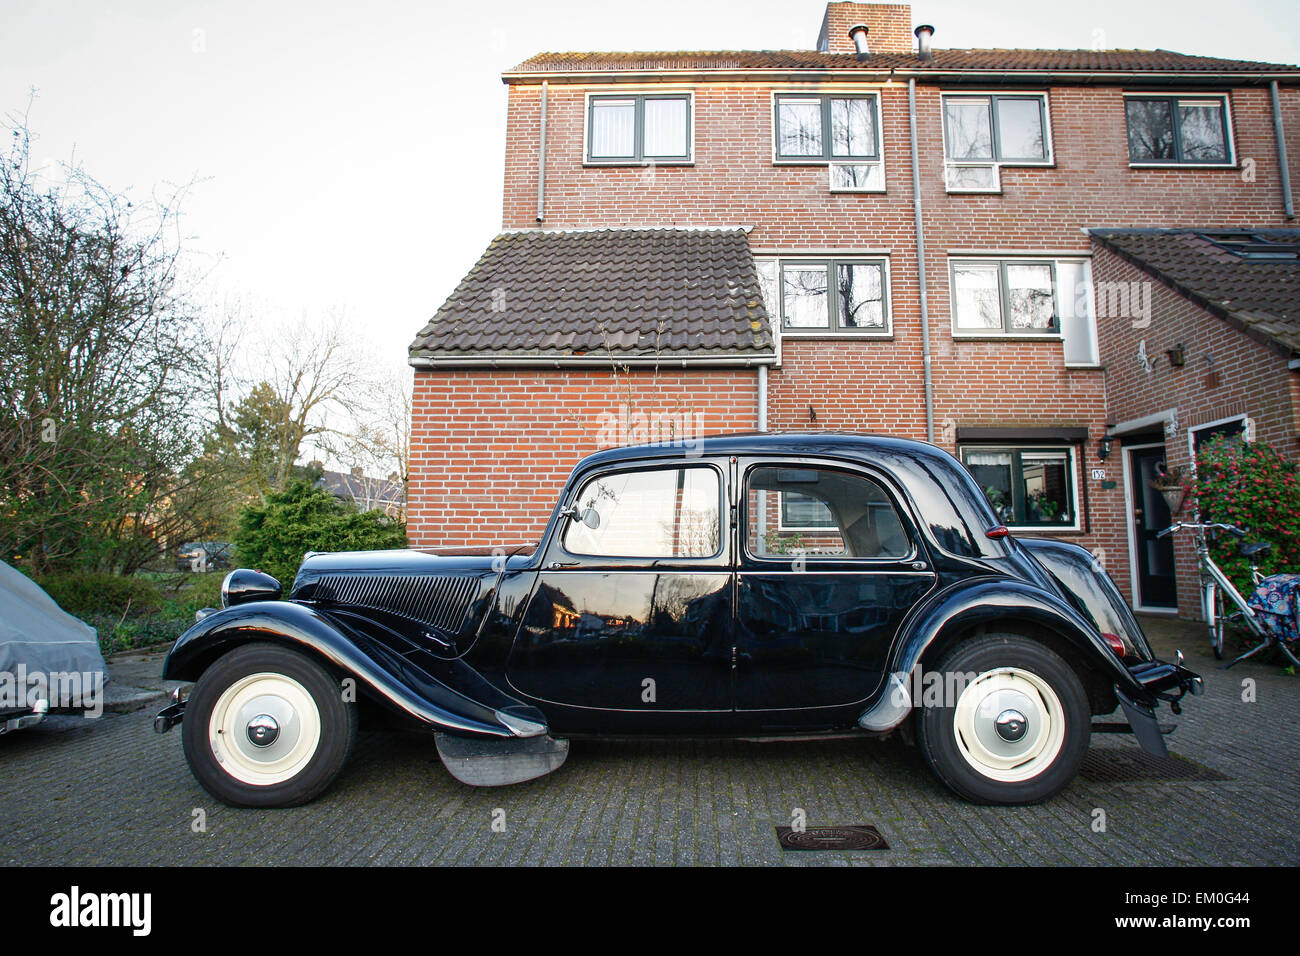 Voorschoten, Netherlands. 14th Apr, 2015. A classic Citroen car is seen in a suburban neighbourhood. It has been estimated that around a third of the oldtimer cars in the Netherlands has been disposed off or sold since new tax laws defining classic cars for which no tax is required as older than 40 years. Previously this was 25 years. Credit:  Willem Arriens/Alamy Live News Stock Photo